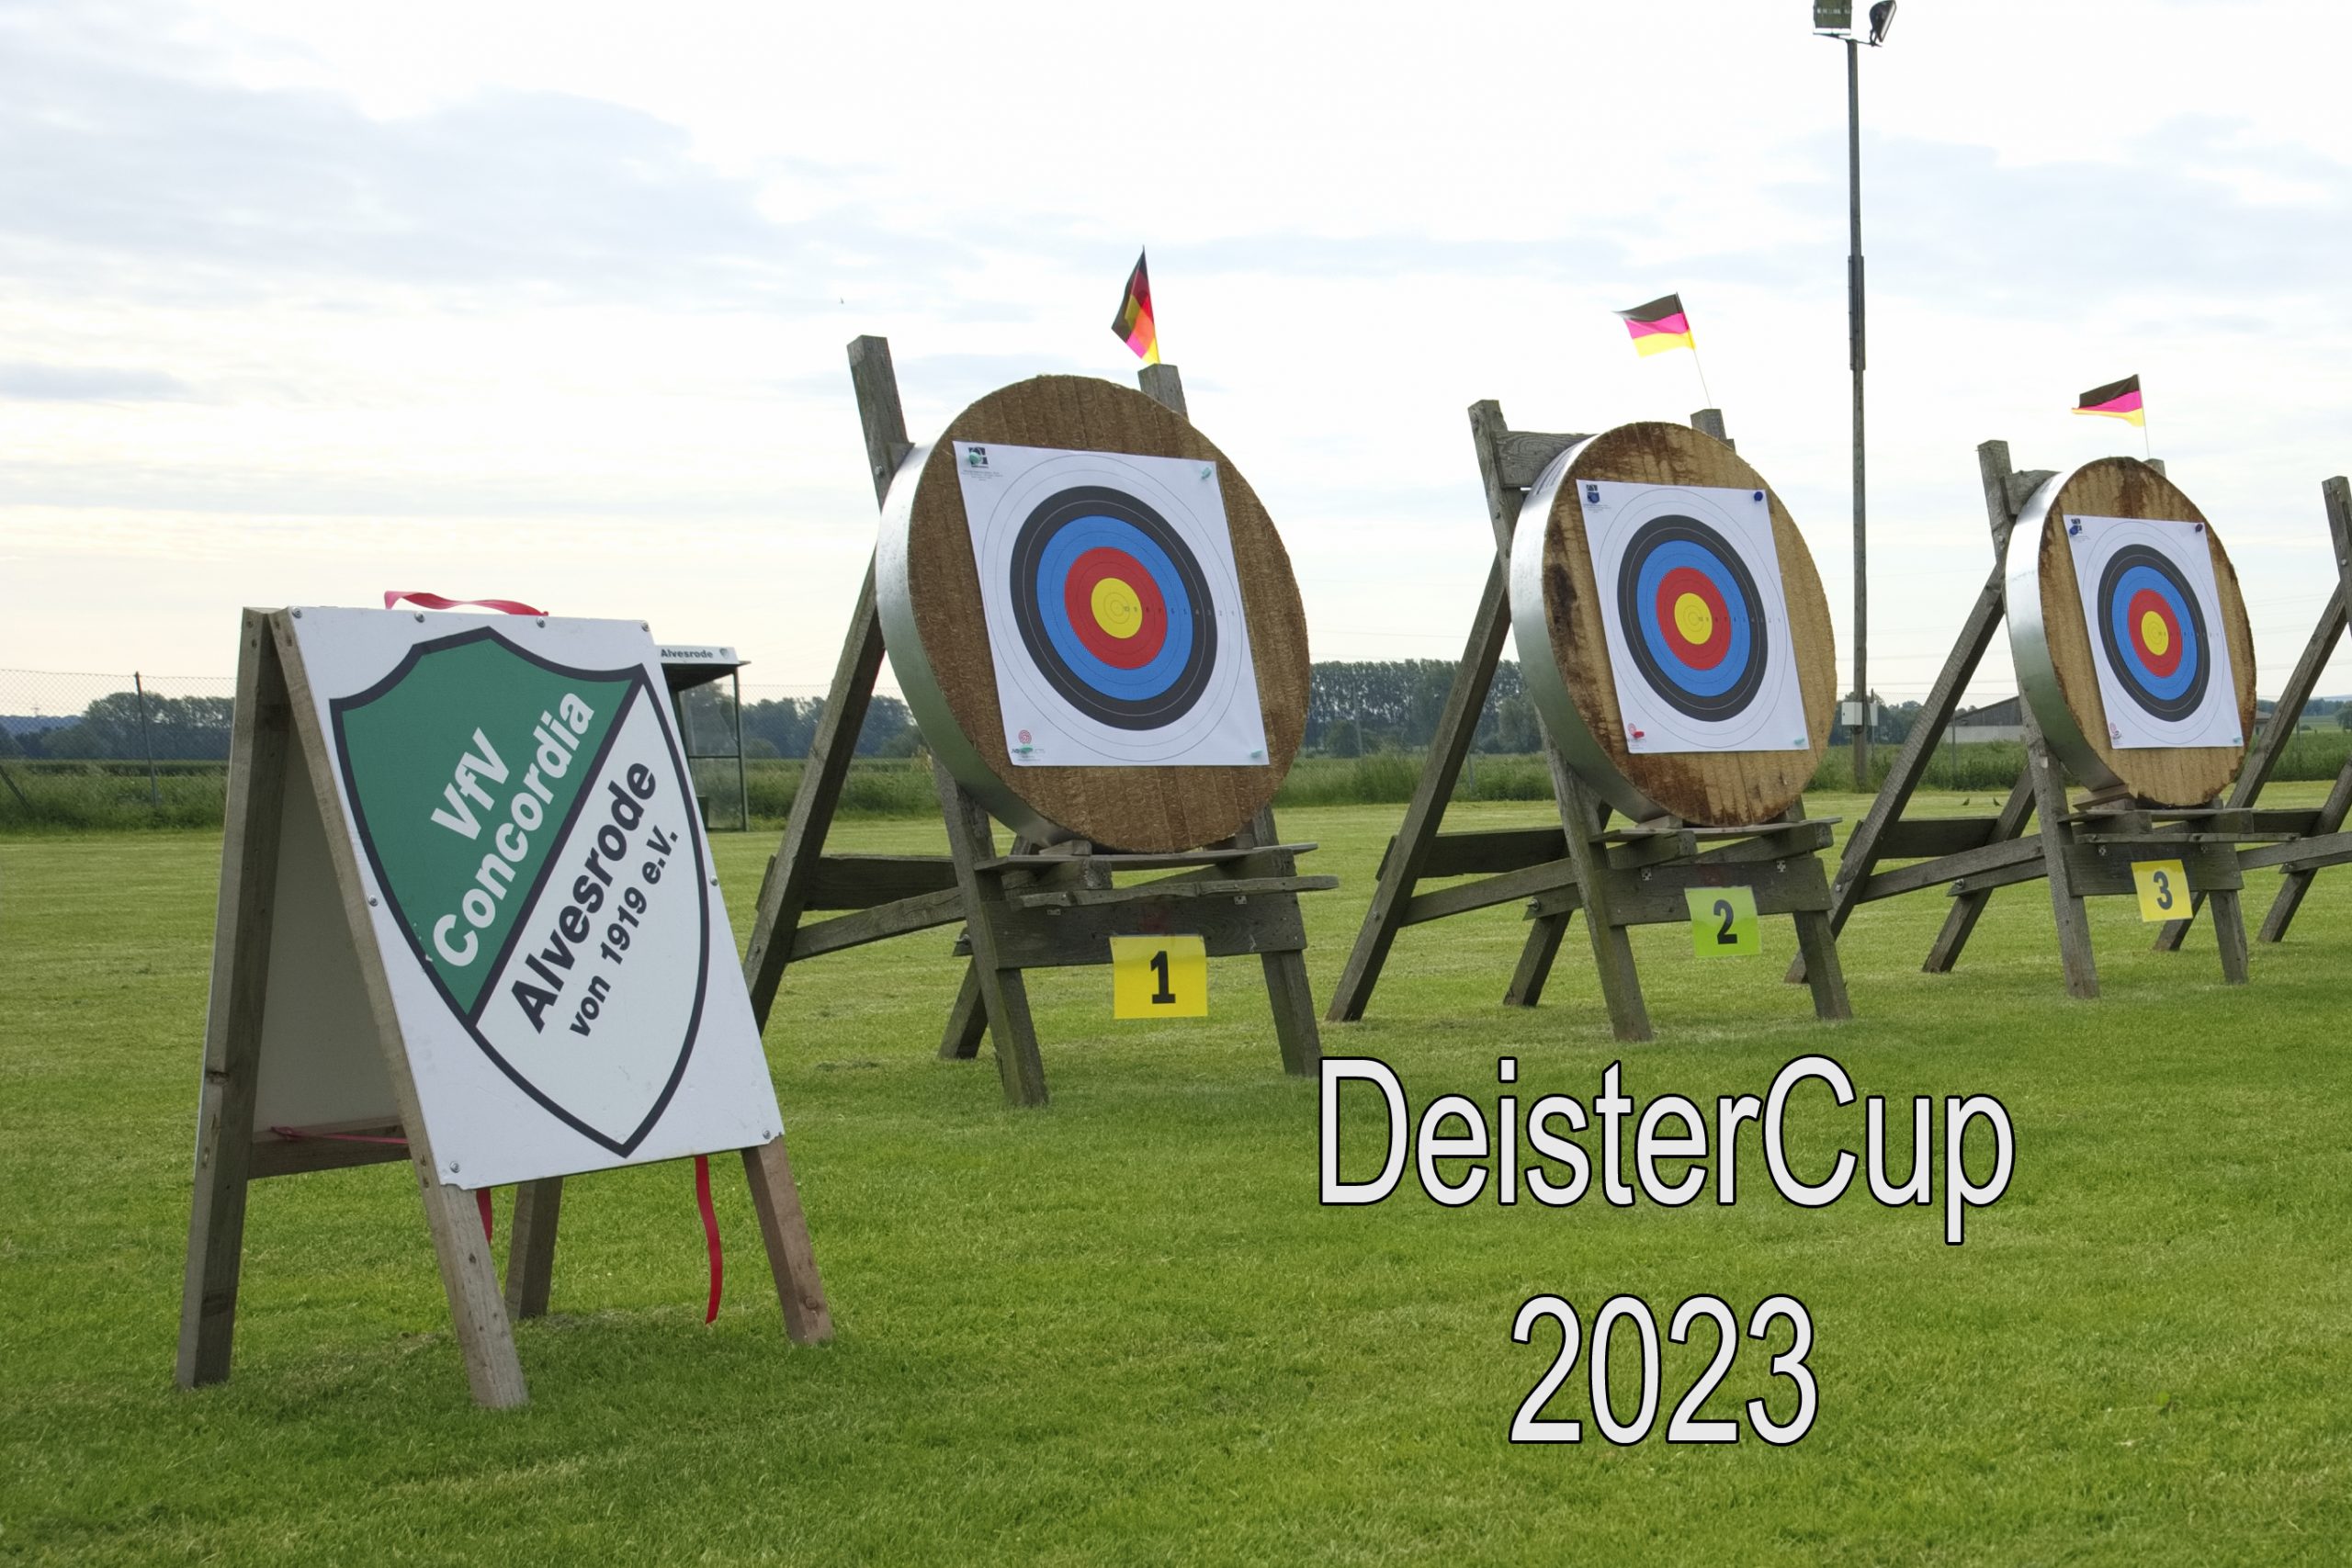 You are currently viewing 3. DeisterCup 2023: Die Starterliste